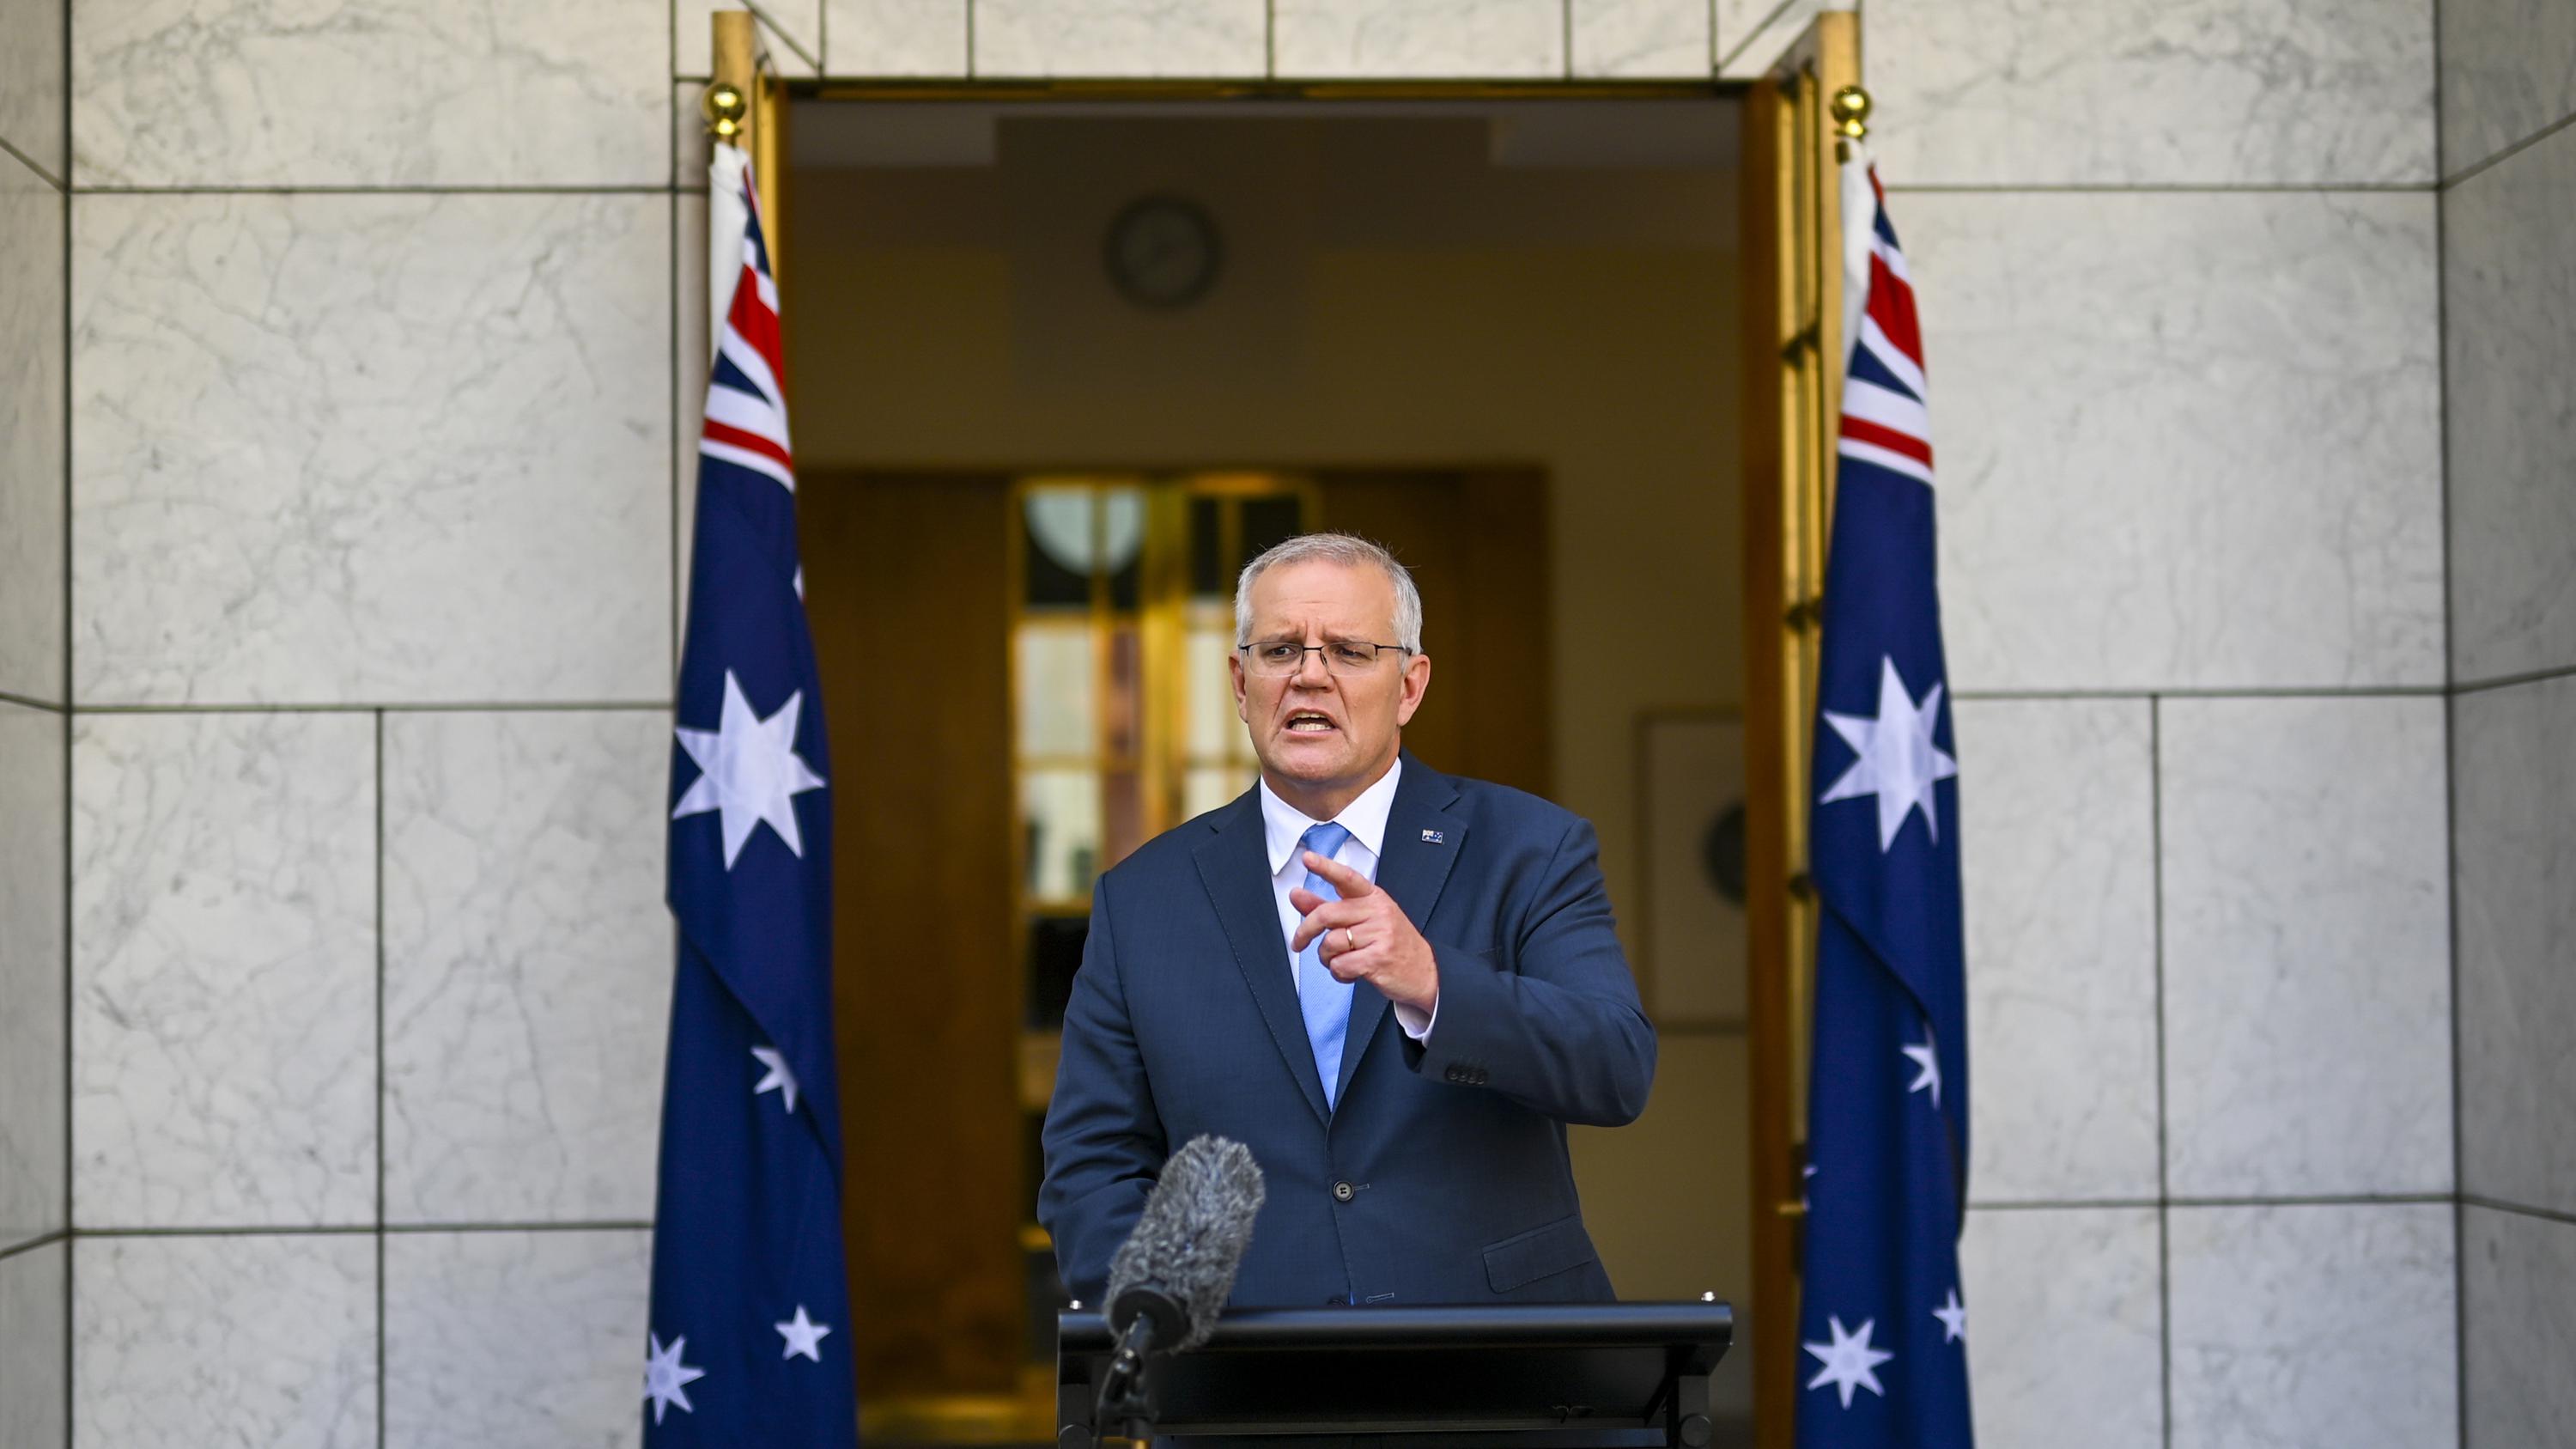 Australian prime minister calls May 21 election